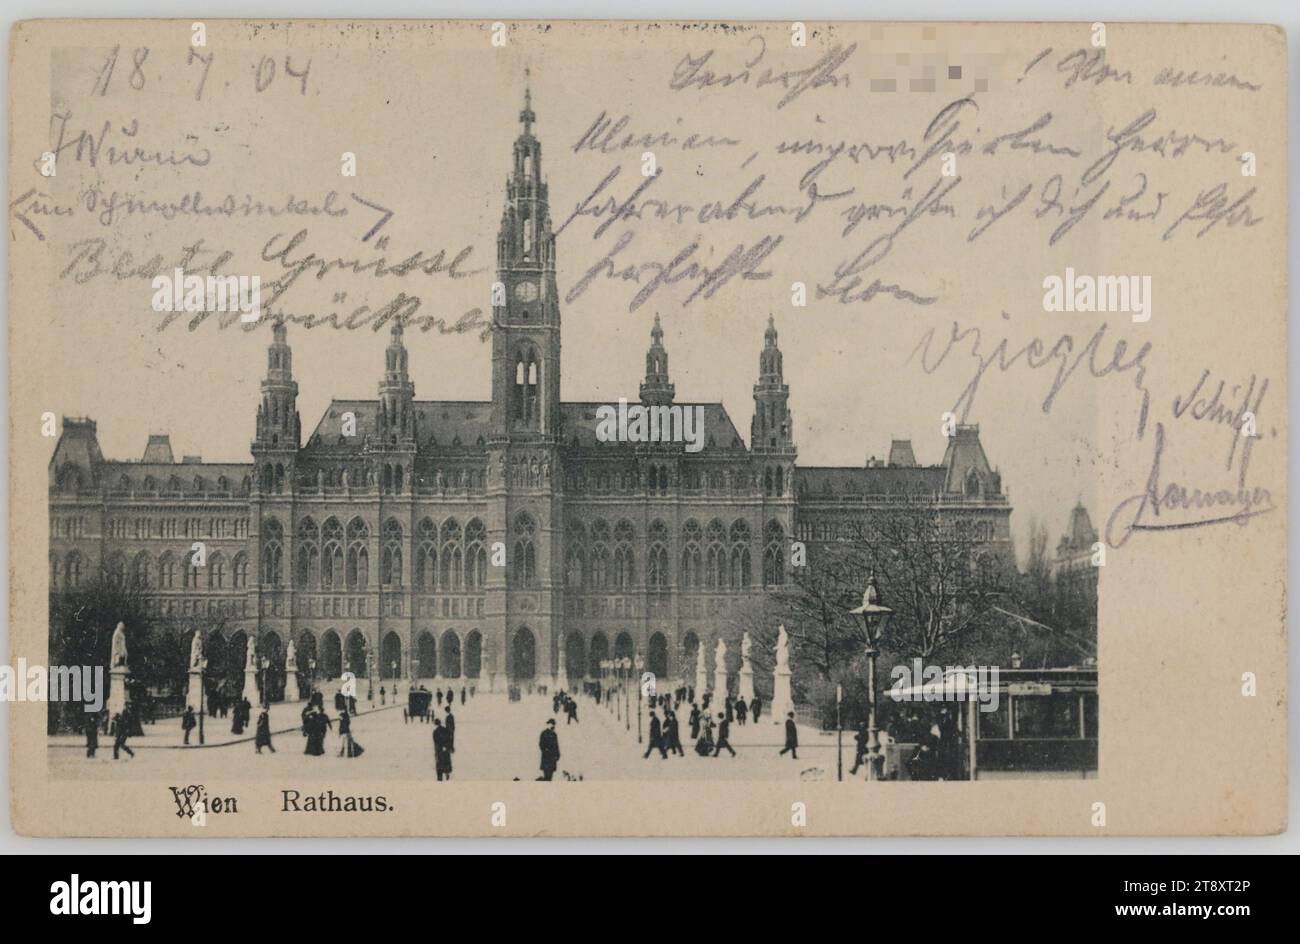 Vienna City Hall, unknown, 1904, cardboard, collotype, inscription, FROM, [...], TO, Attersee a, Attersee, ADDRESS, Mrs. [...] [...], Attersee a, Attersee, Upper Austria, MESSAGE, Dearest [...]!, From a small [...] gentleman driver evening I greet you and Elsa cordially Leon, [...] 3 names, J Wurm (in Schmollwinkel), Best regards [Brückner], Sights, Ringstraße, Public transport, Media and communication, Traffic and transport, Postcards with transliteration, 1. District: Inner City, City Hall, square, place, circus, etc, monument, statue, sculpture, with people, street lighting Stock Photo